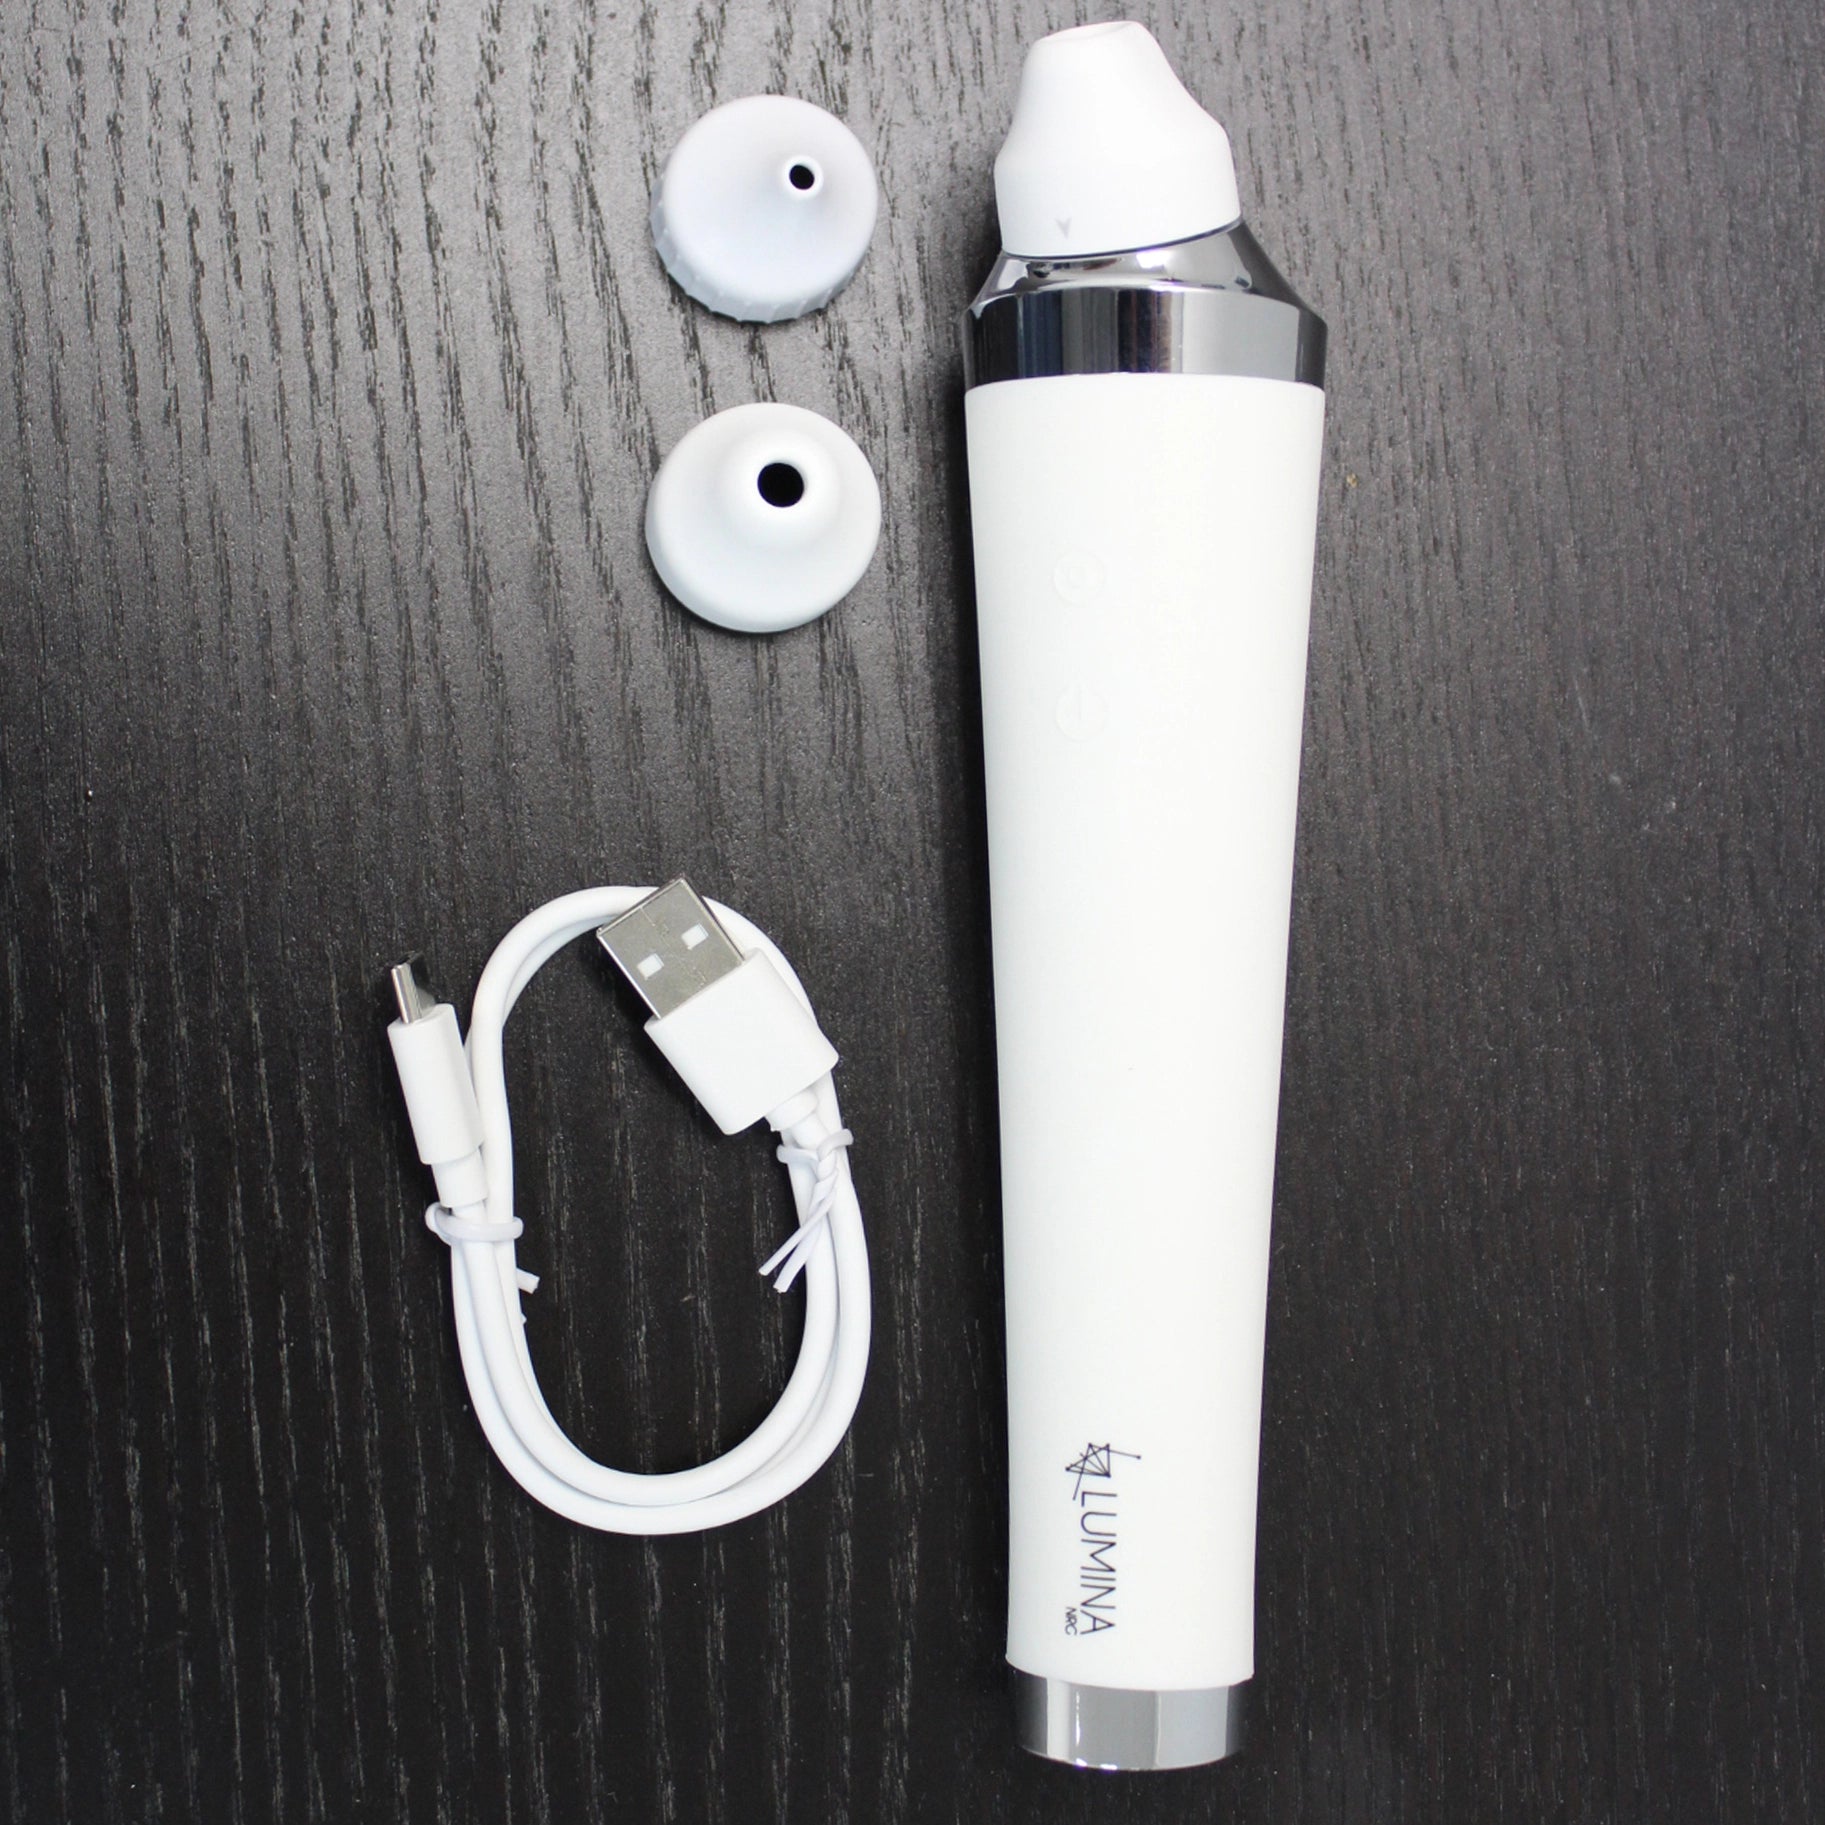 LUMINA NRG Dermazoom Blackhead Remover [IN-STORE PURCHASE ONLY]